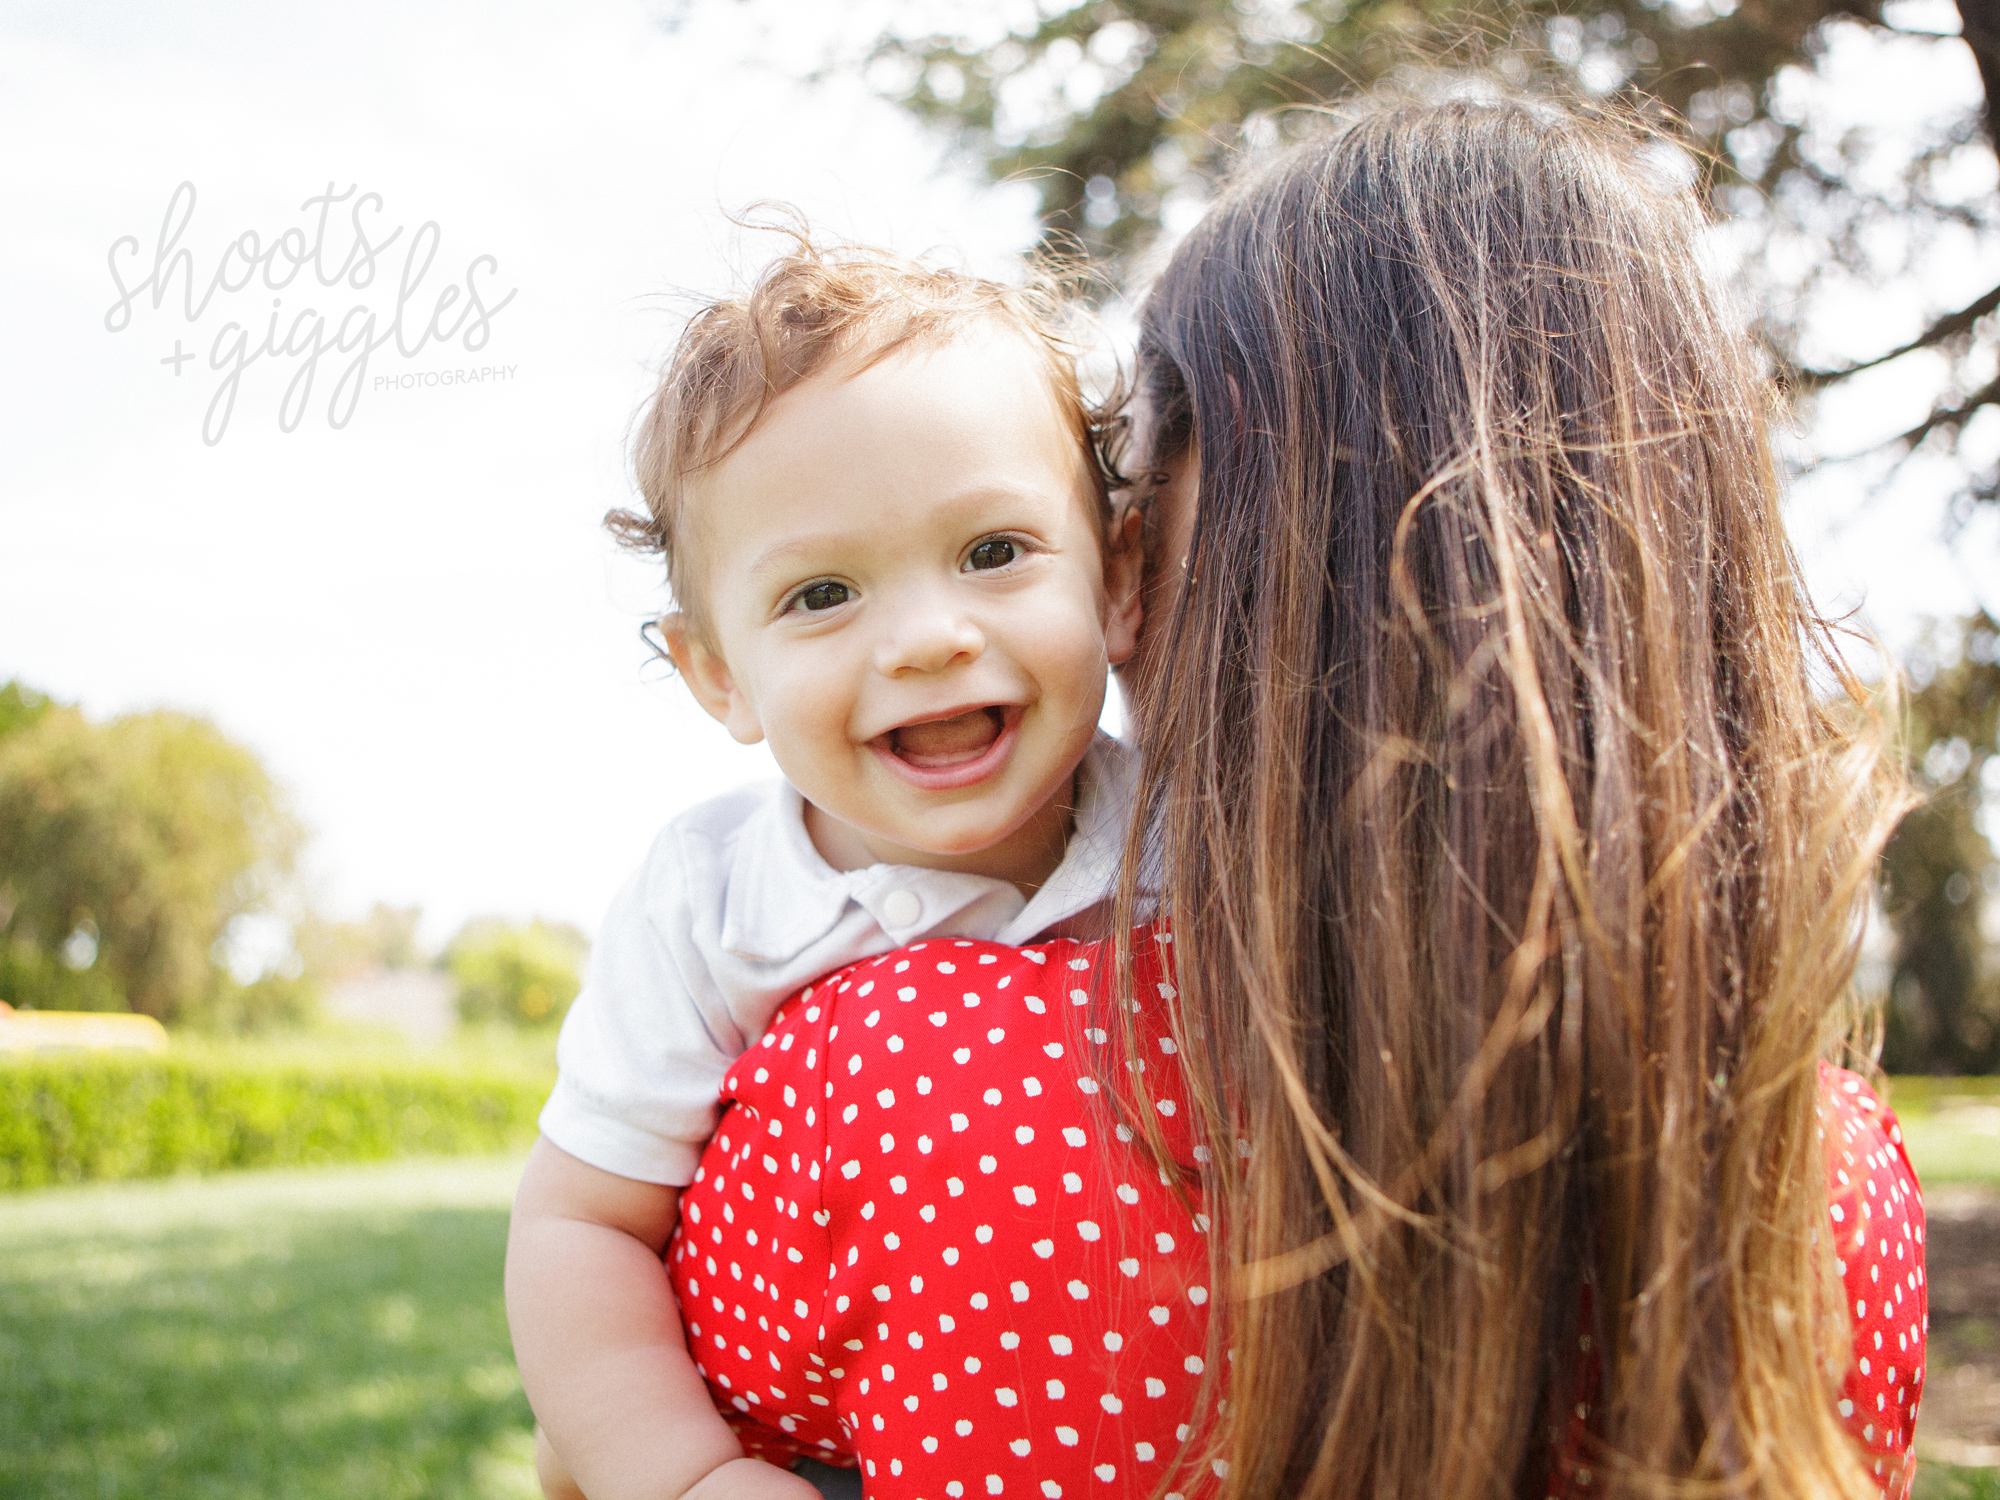 Family Photo Album  Brentwood Baby & Kids Photographer - Los